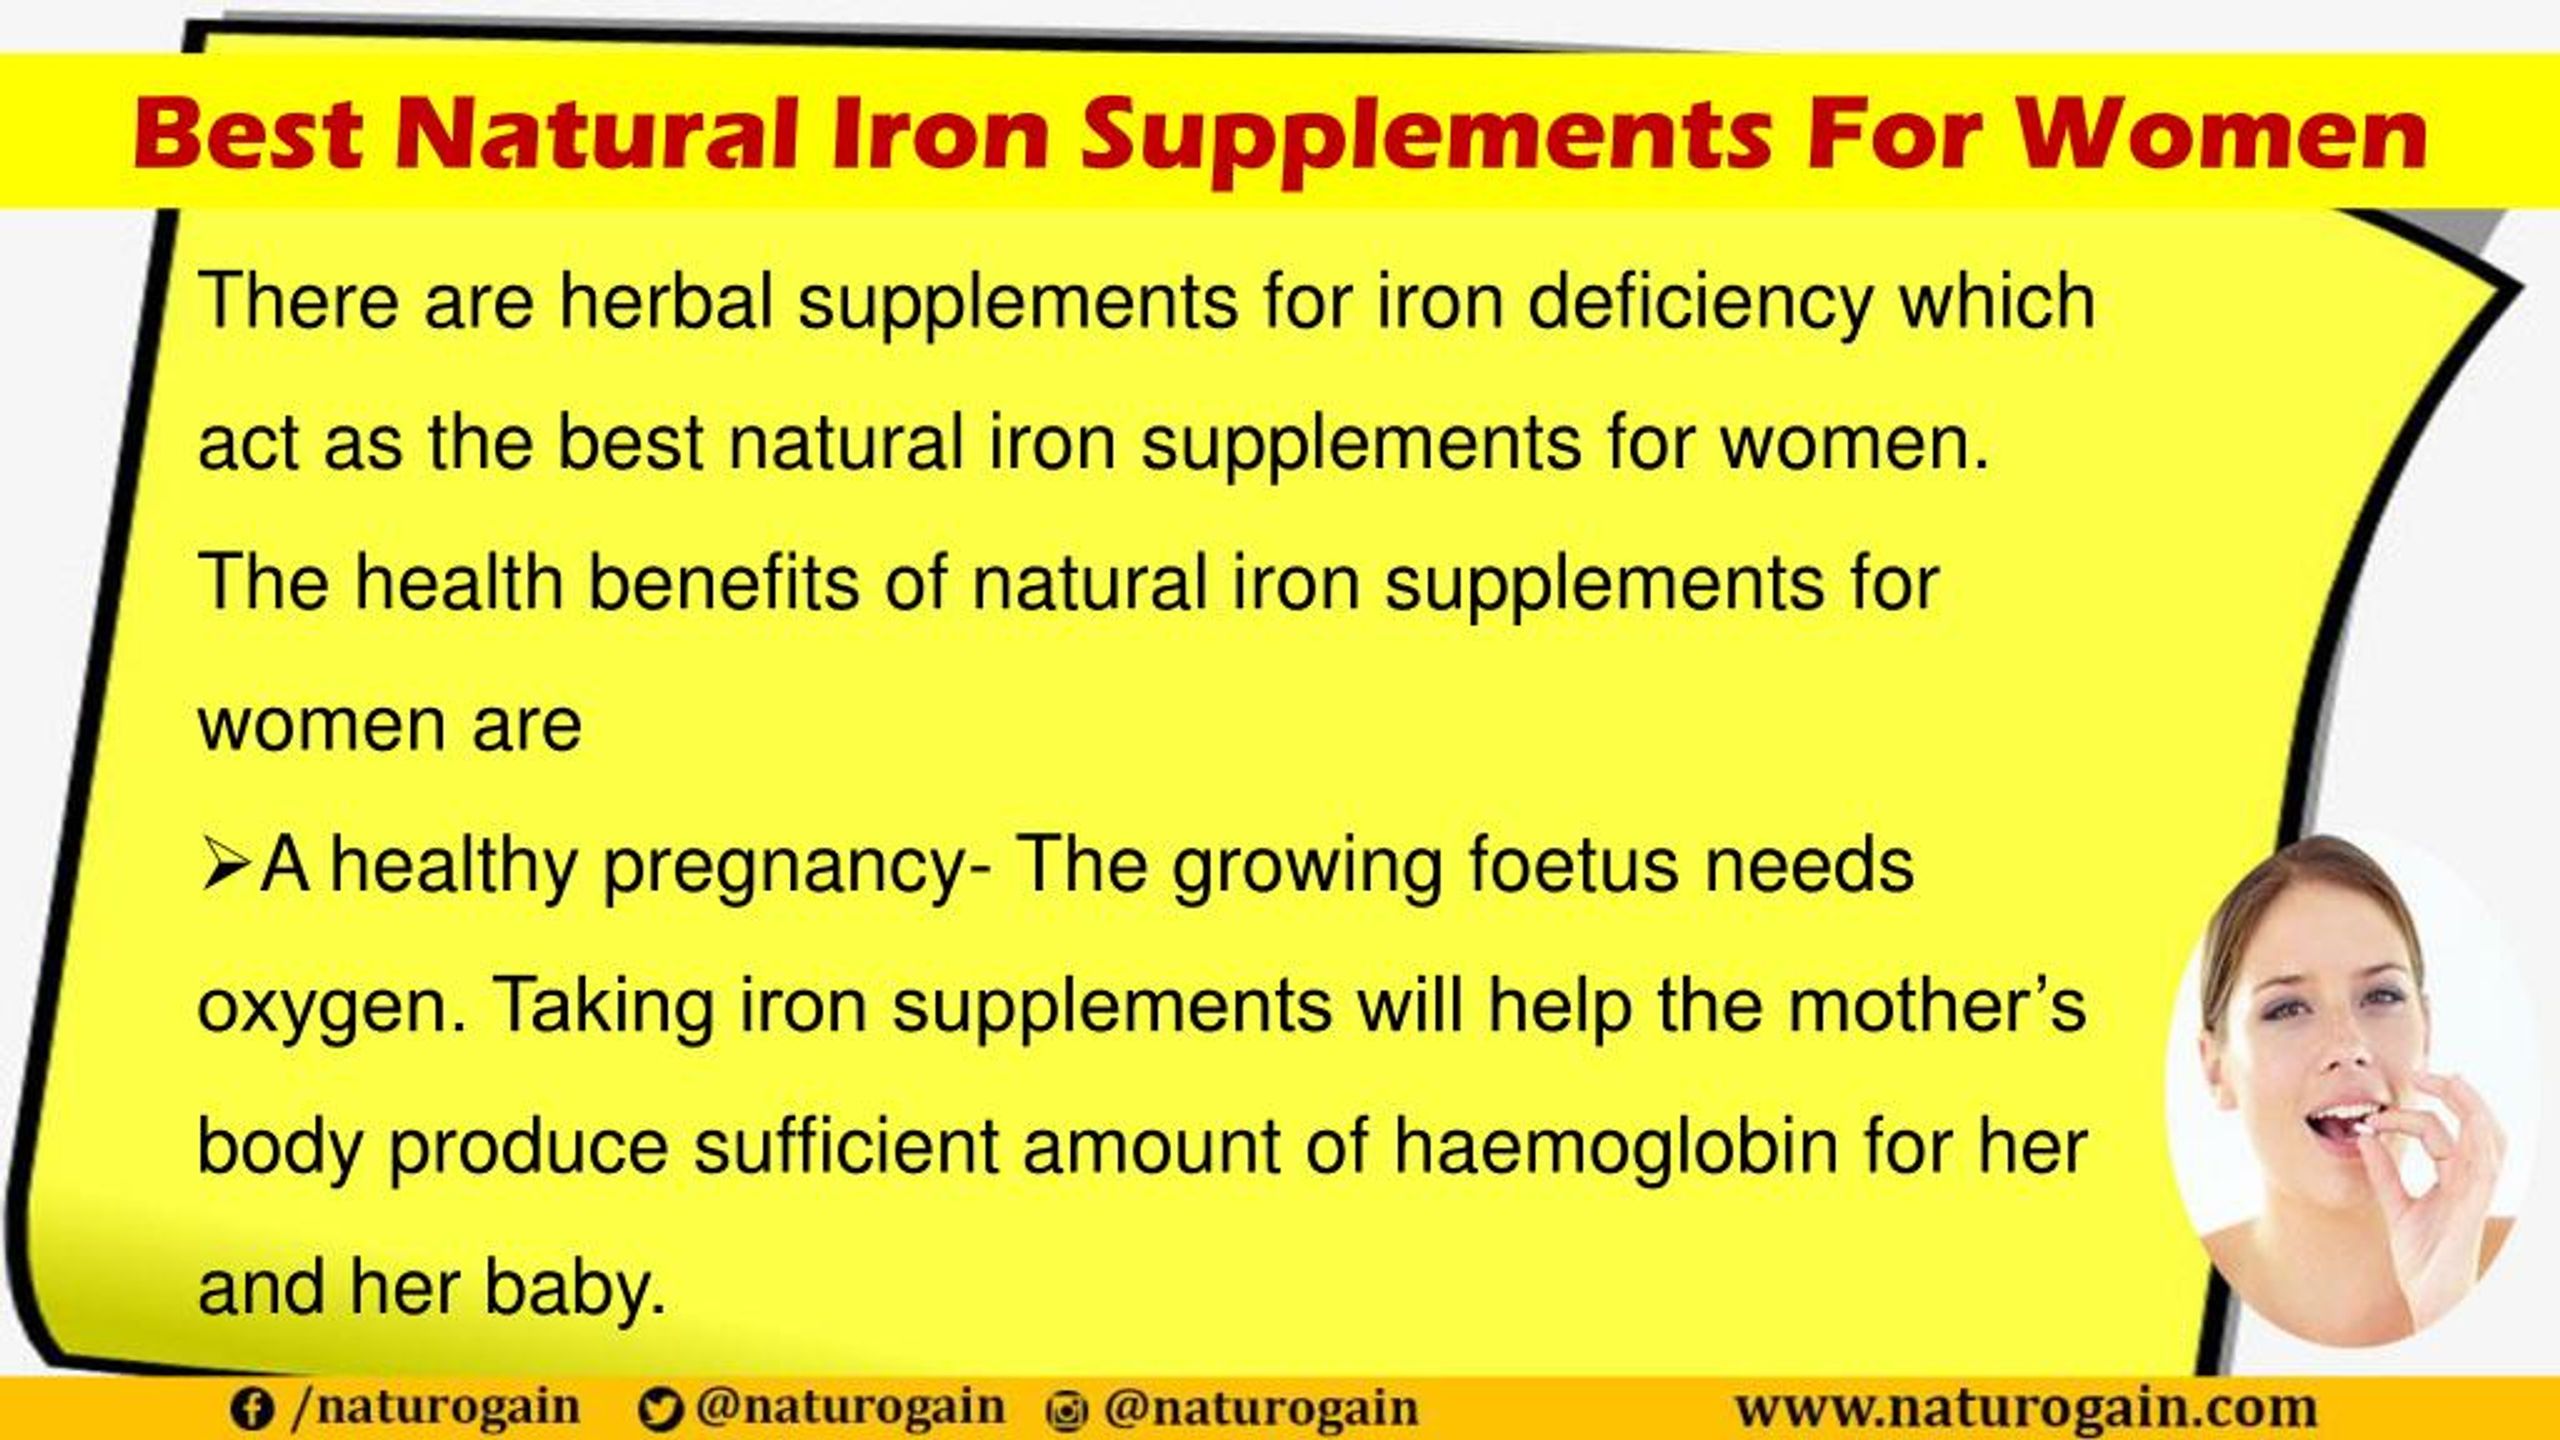 PPT - Best Natural Iron Supplements for Women and its Health Benefits ...